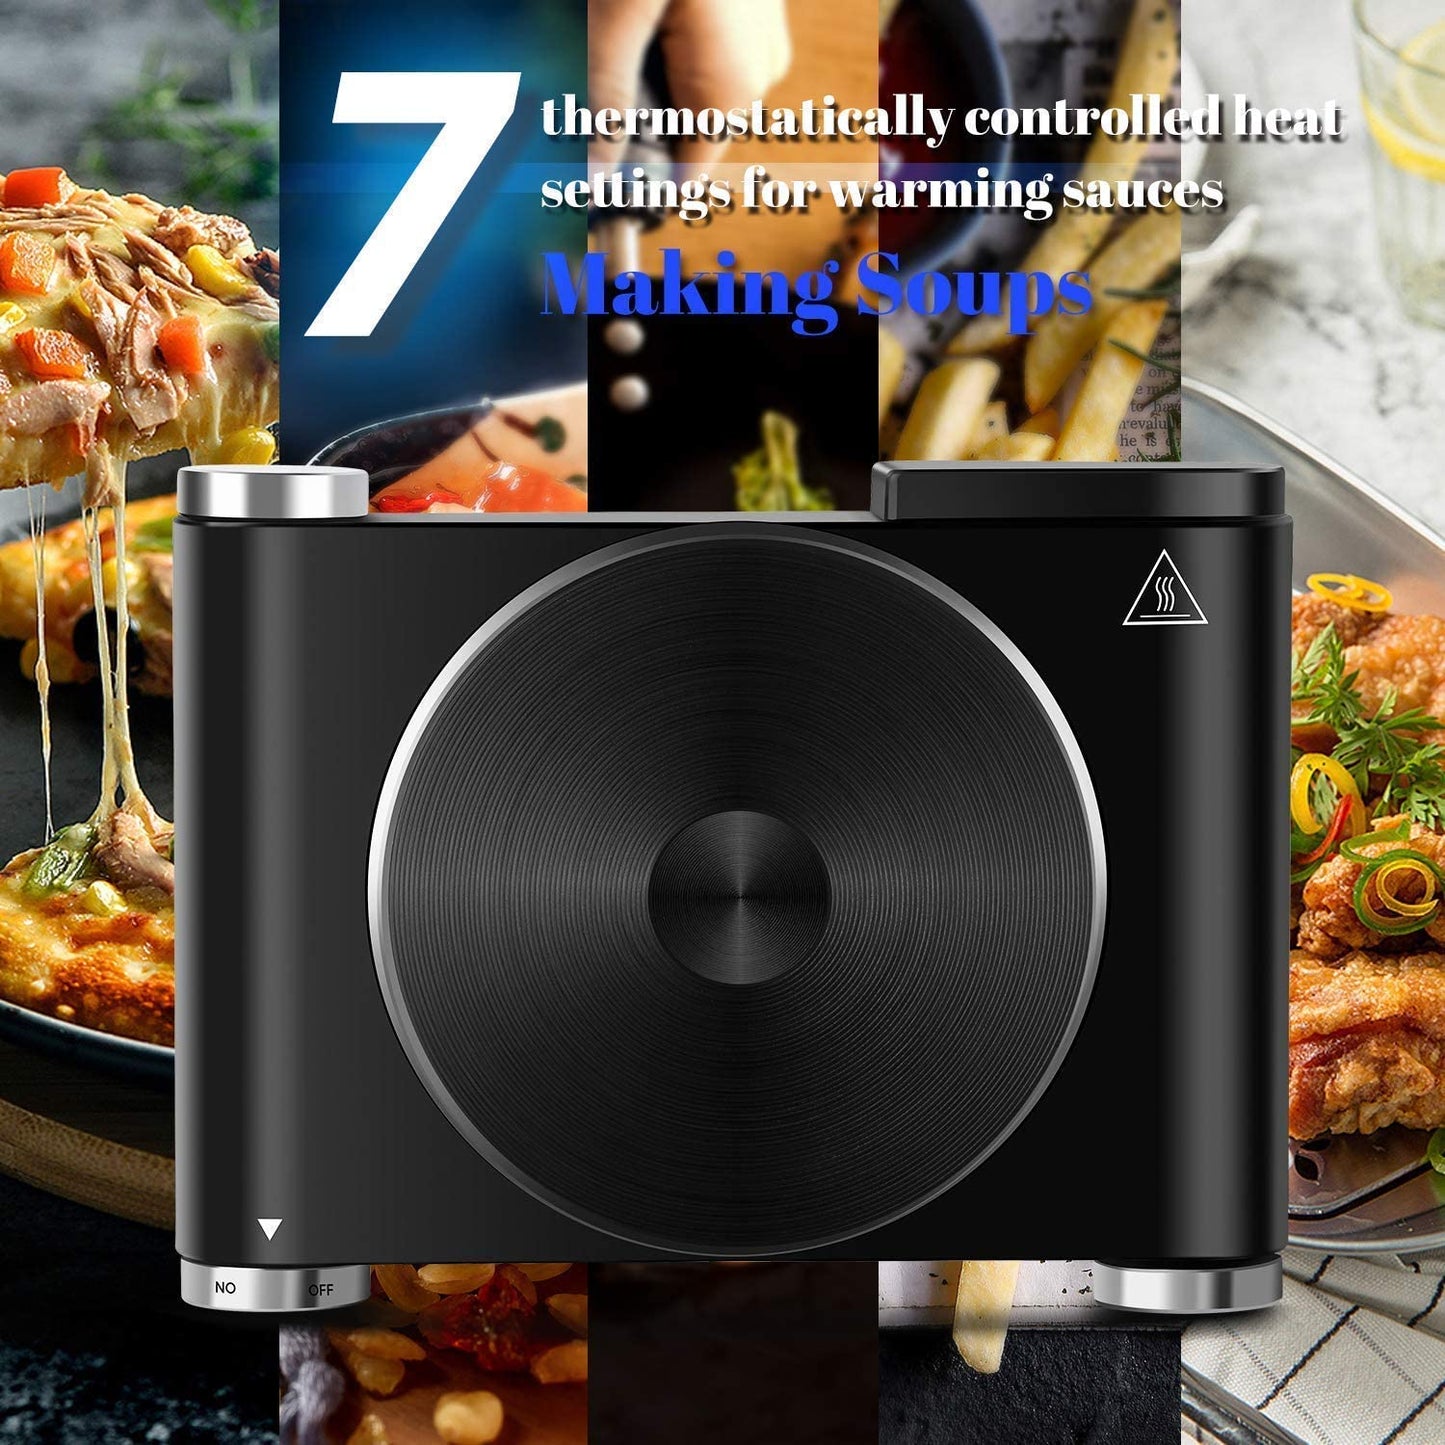 Cusimax Hot Plate Electric Burner Single Burner Cast Iron hot plates for cooking Portable Burner 1500W with Adjustable Temperature Control Stainless Steel